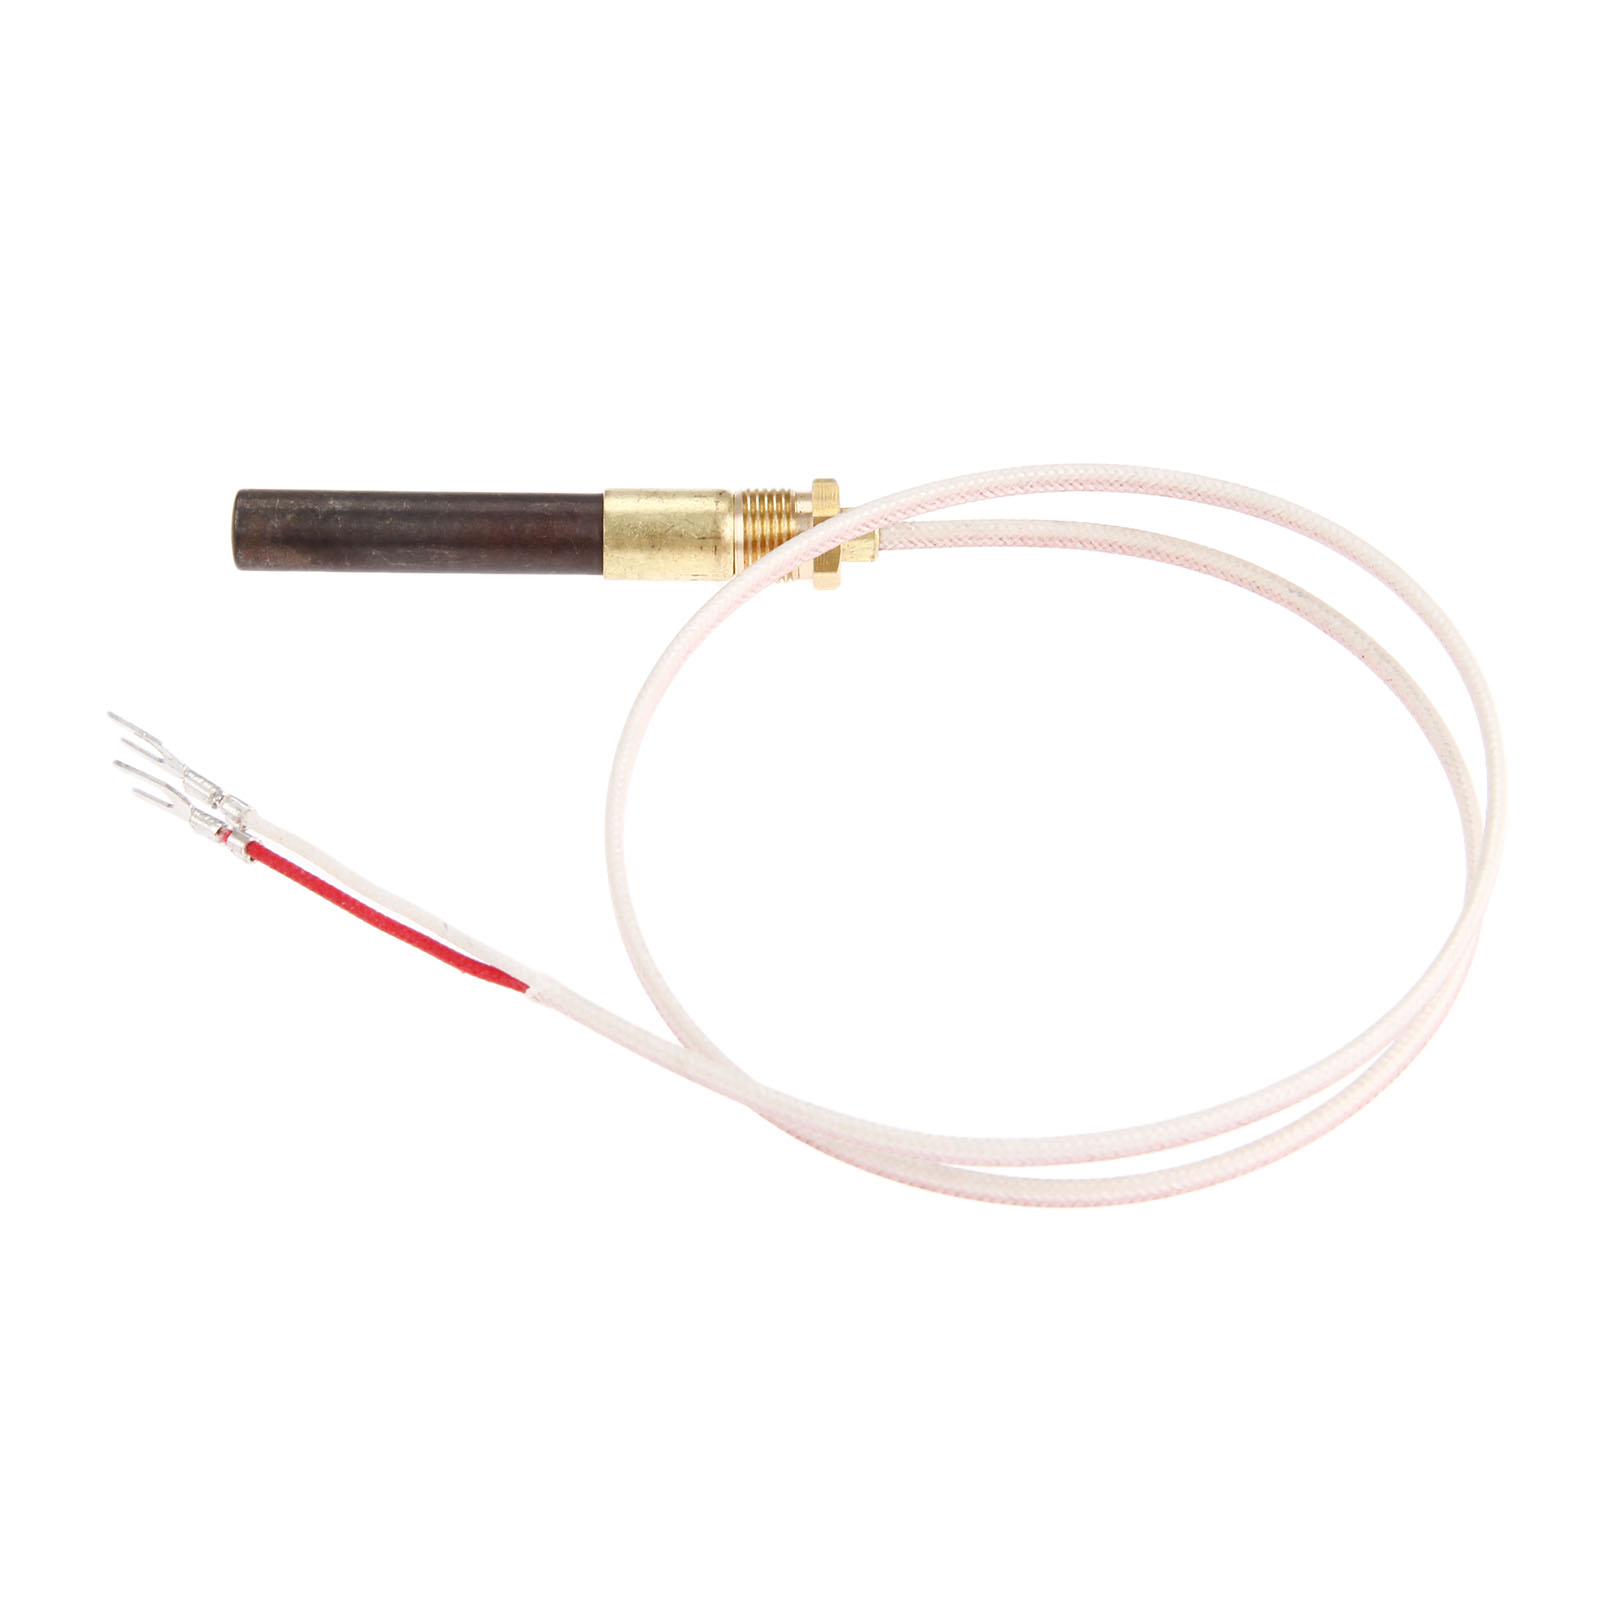 1Pc 24-inch 750-mv Fireplace Millivolt Resistance Universal Thermopile Generators Used In Gas Fireplace Water Heater Equipment